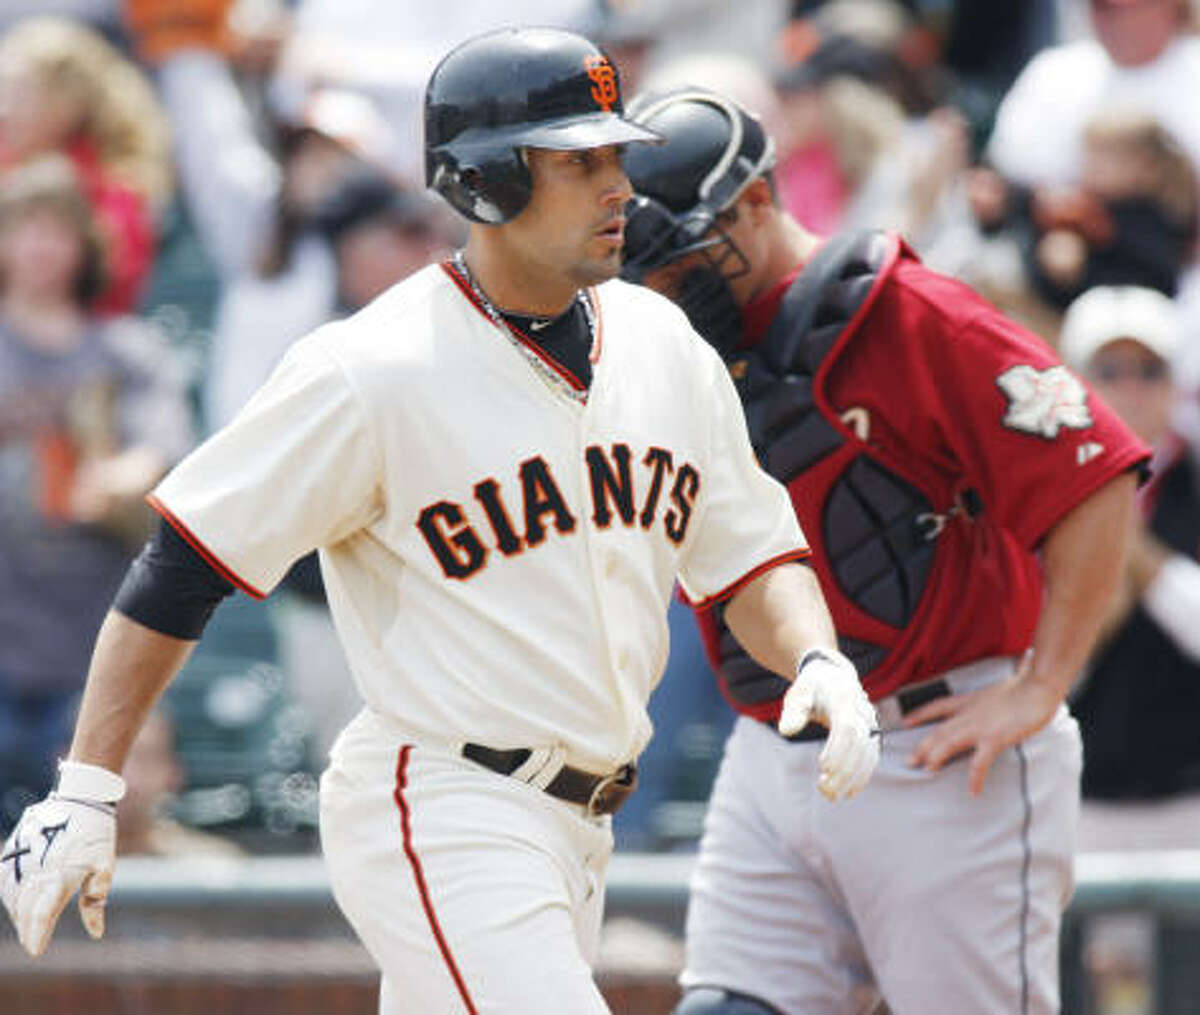 Giants left fielder Andres Torres heads for the dugout after hitting a home run during the first inning.